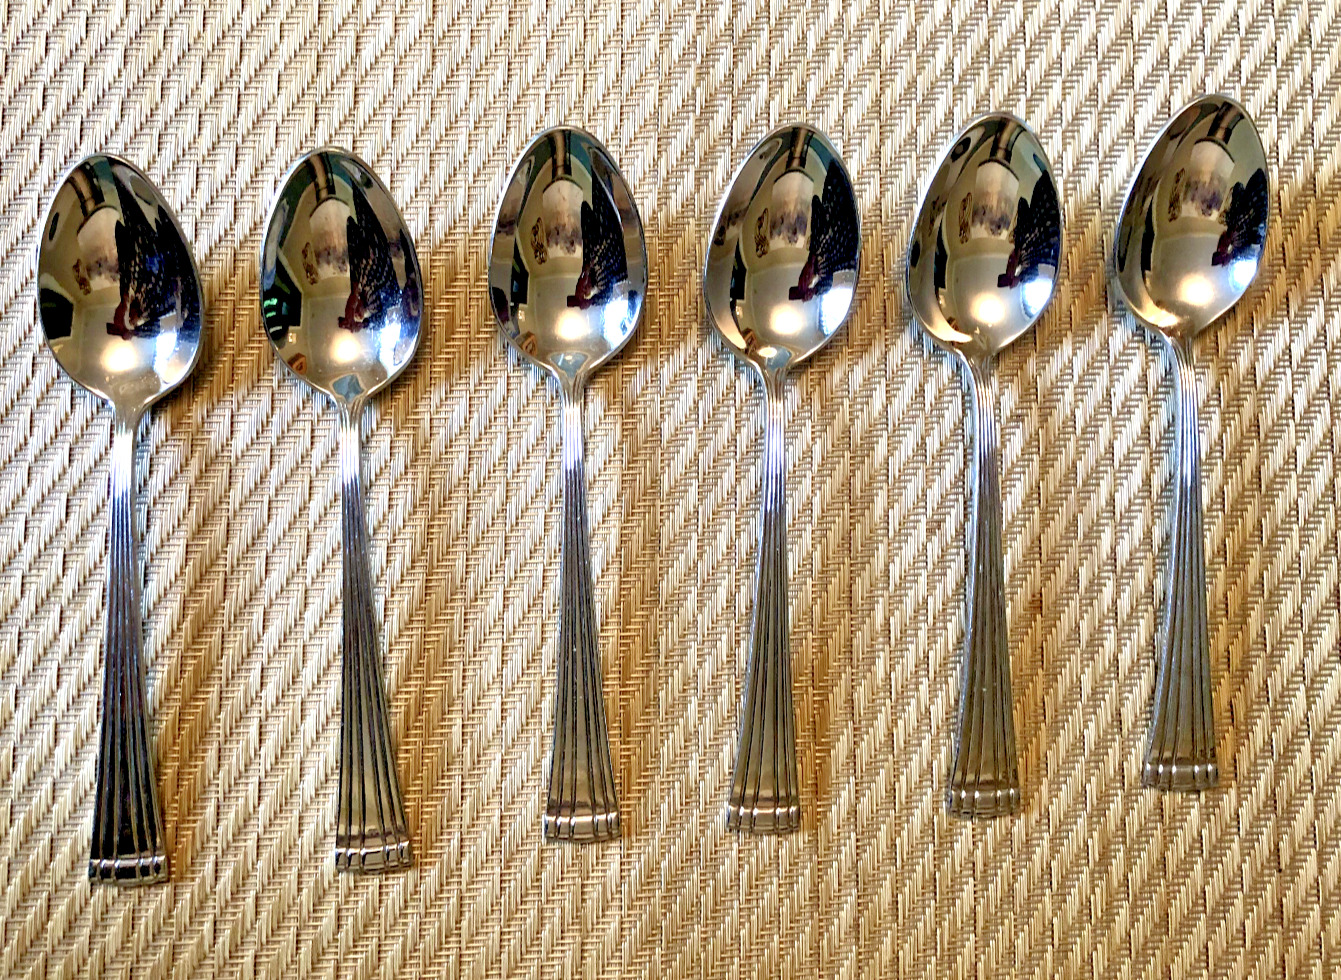 Retired Reed & Barton Westwood Stainless Flatware Lot of 6 Tablespoons